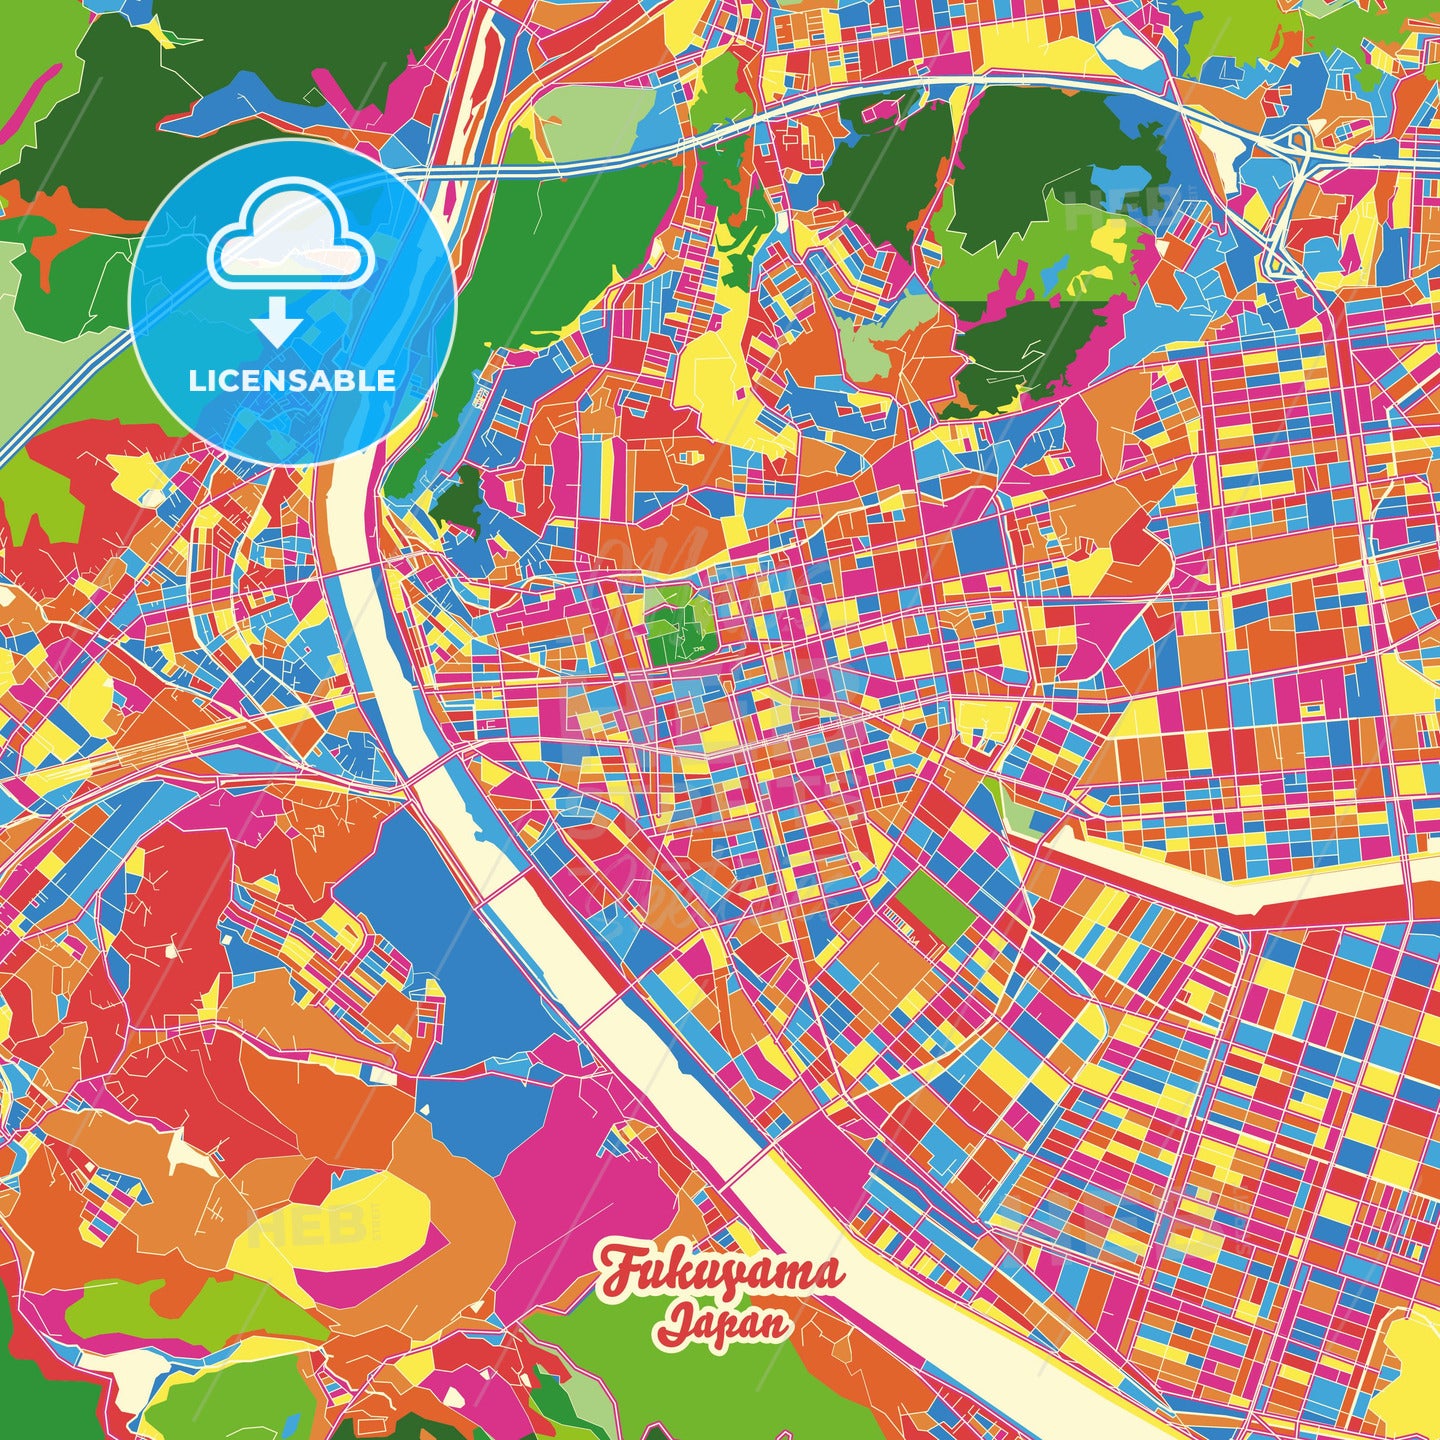 Fukuyama, Japan Crazy Colorful Street Map Poster Template - HEBSTREITS Sketches